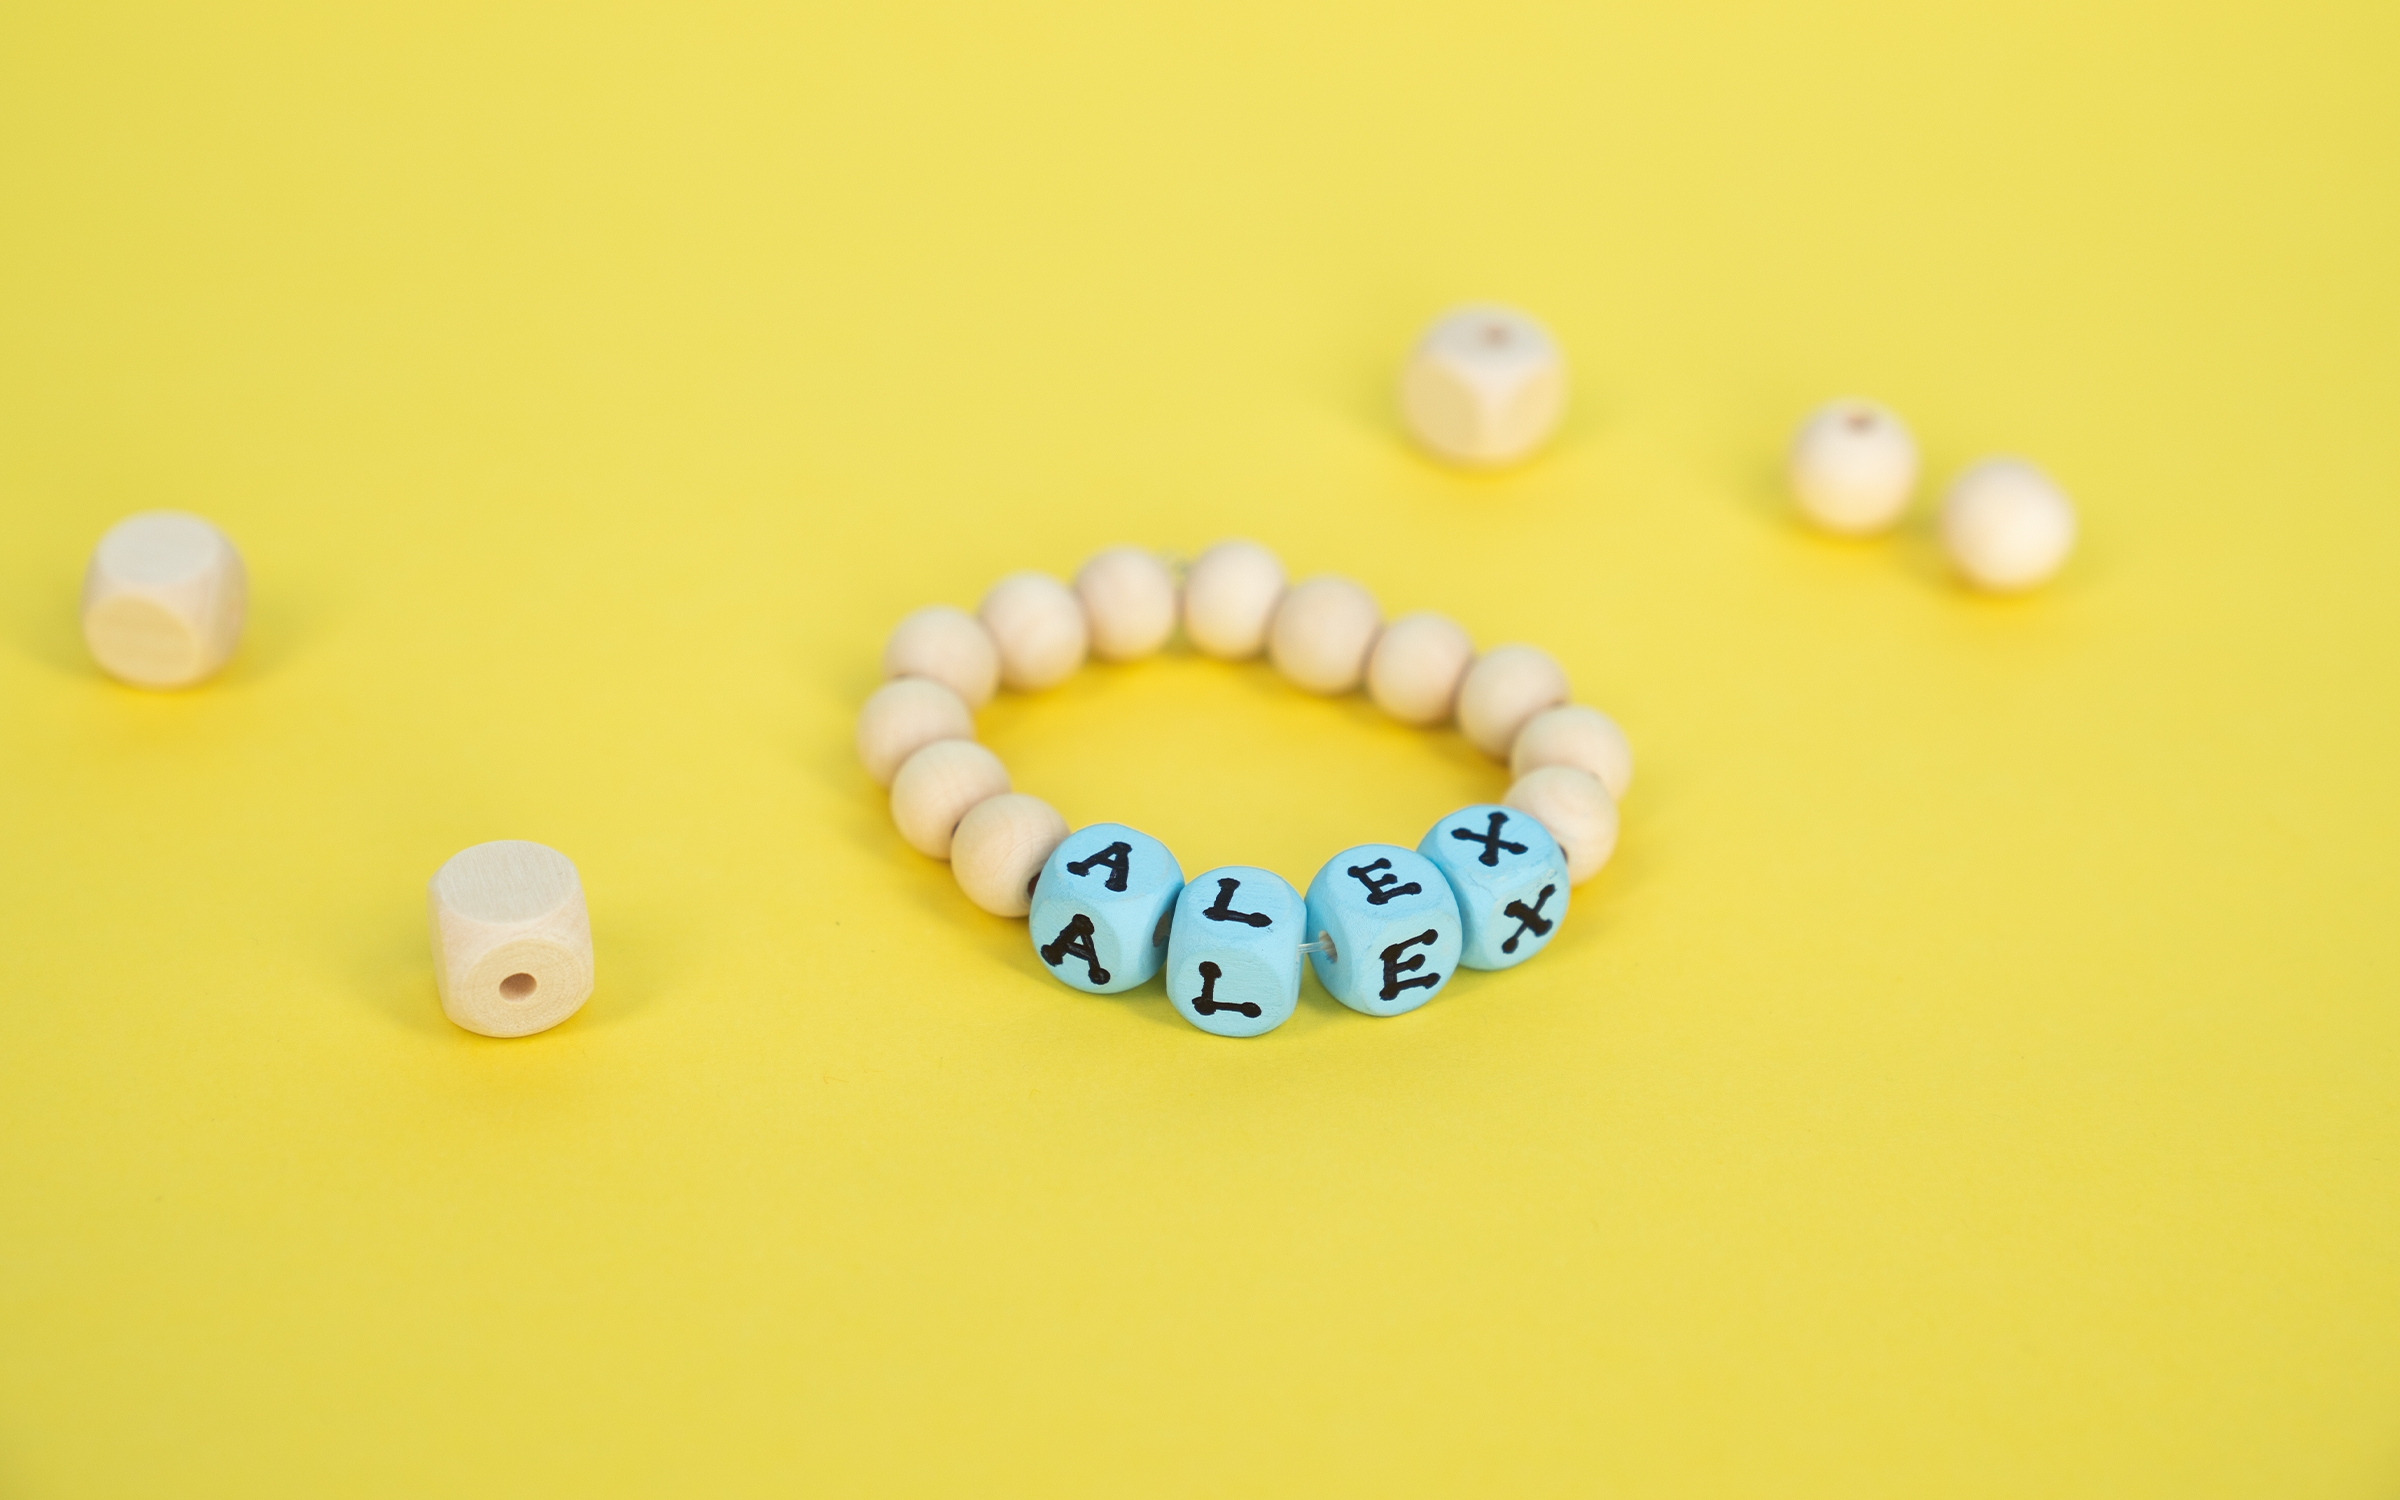 How to Make a Simple Friendship Bracelet With Letters Beads : 7